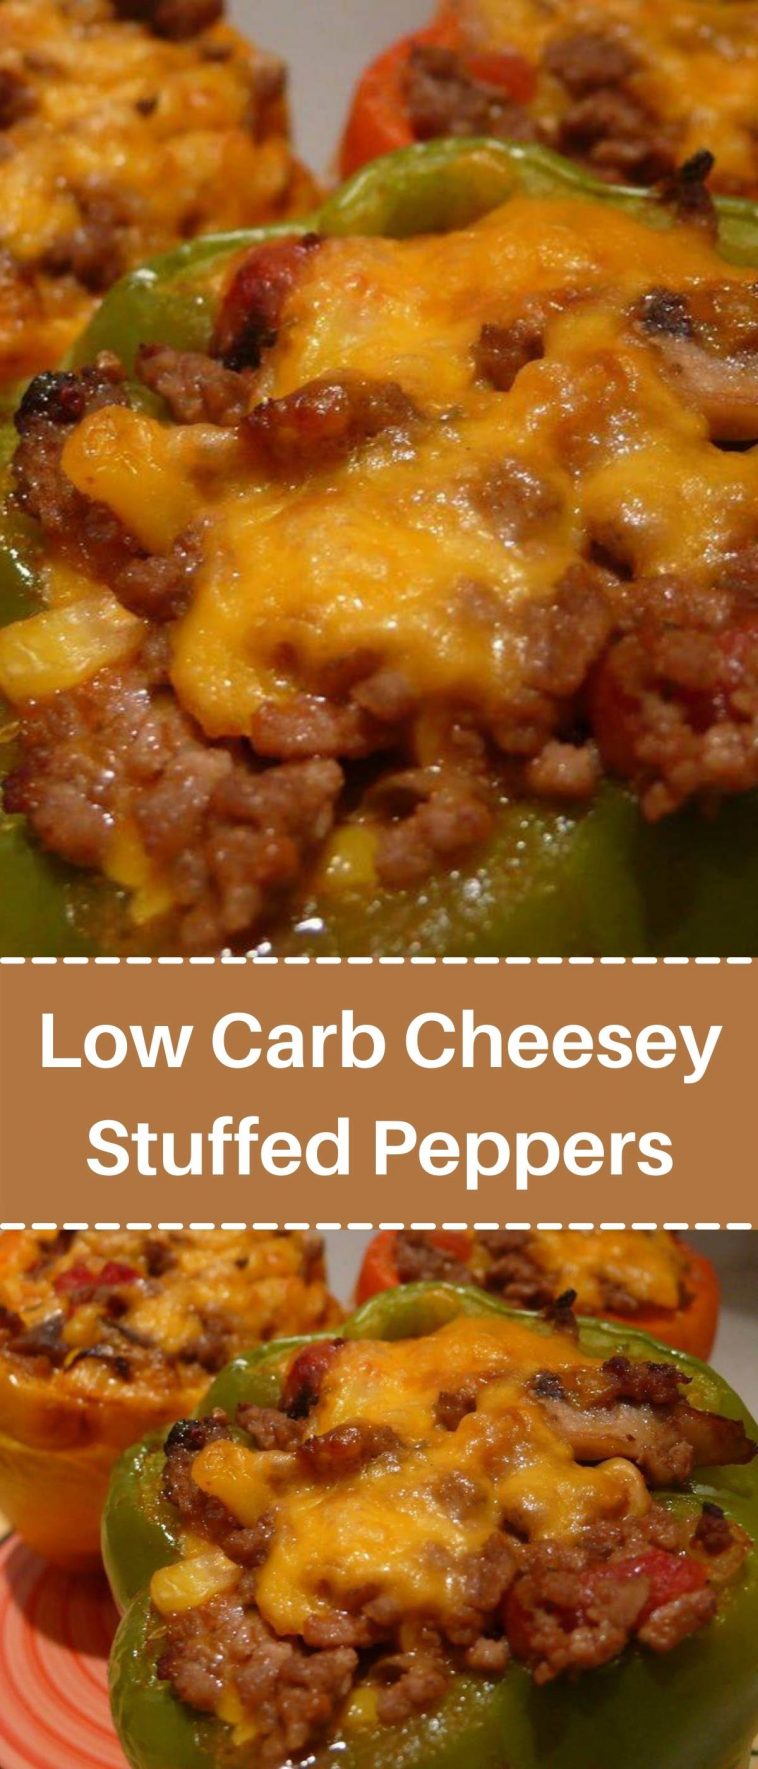 Stuff it! Low Carb Cheesey Stuffed Peppers